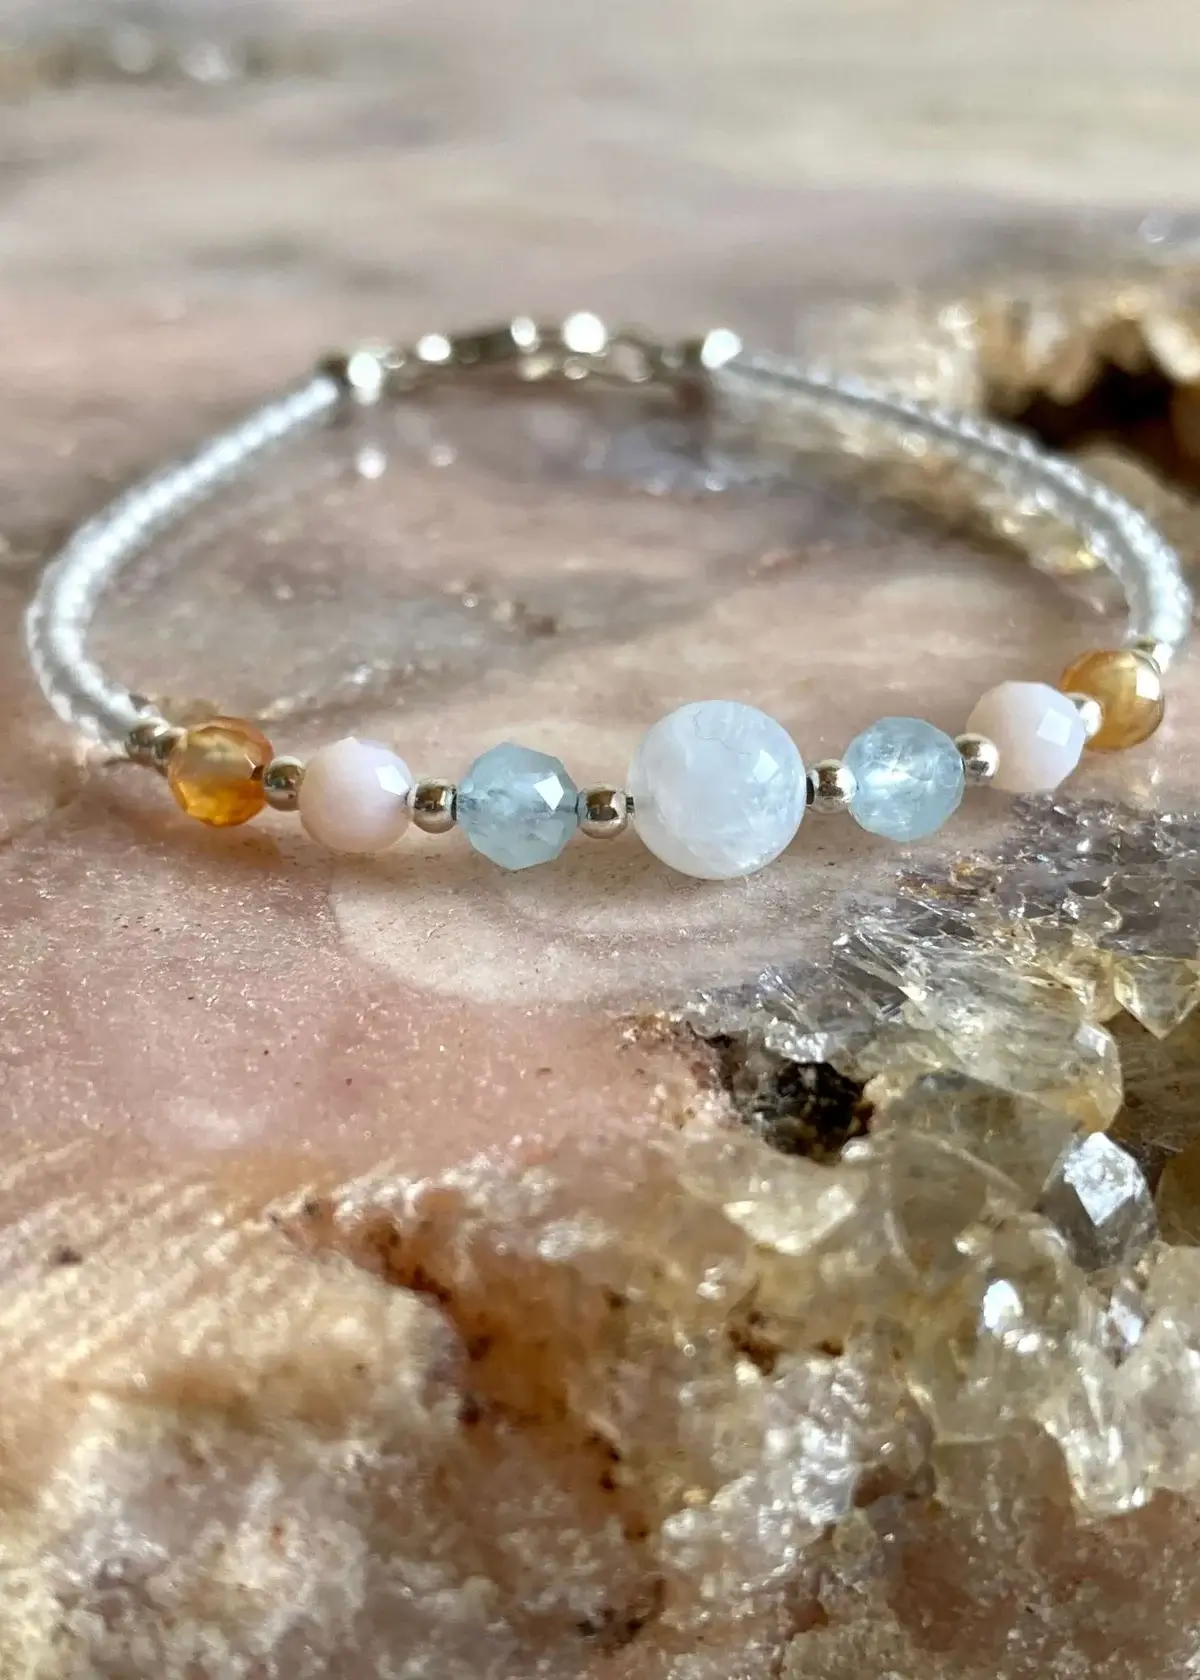 How to choose the right fertility bracelet?